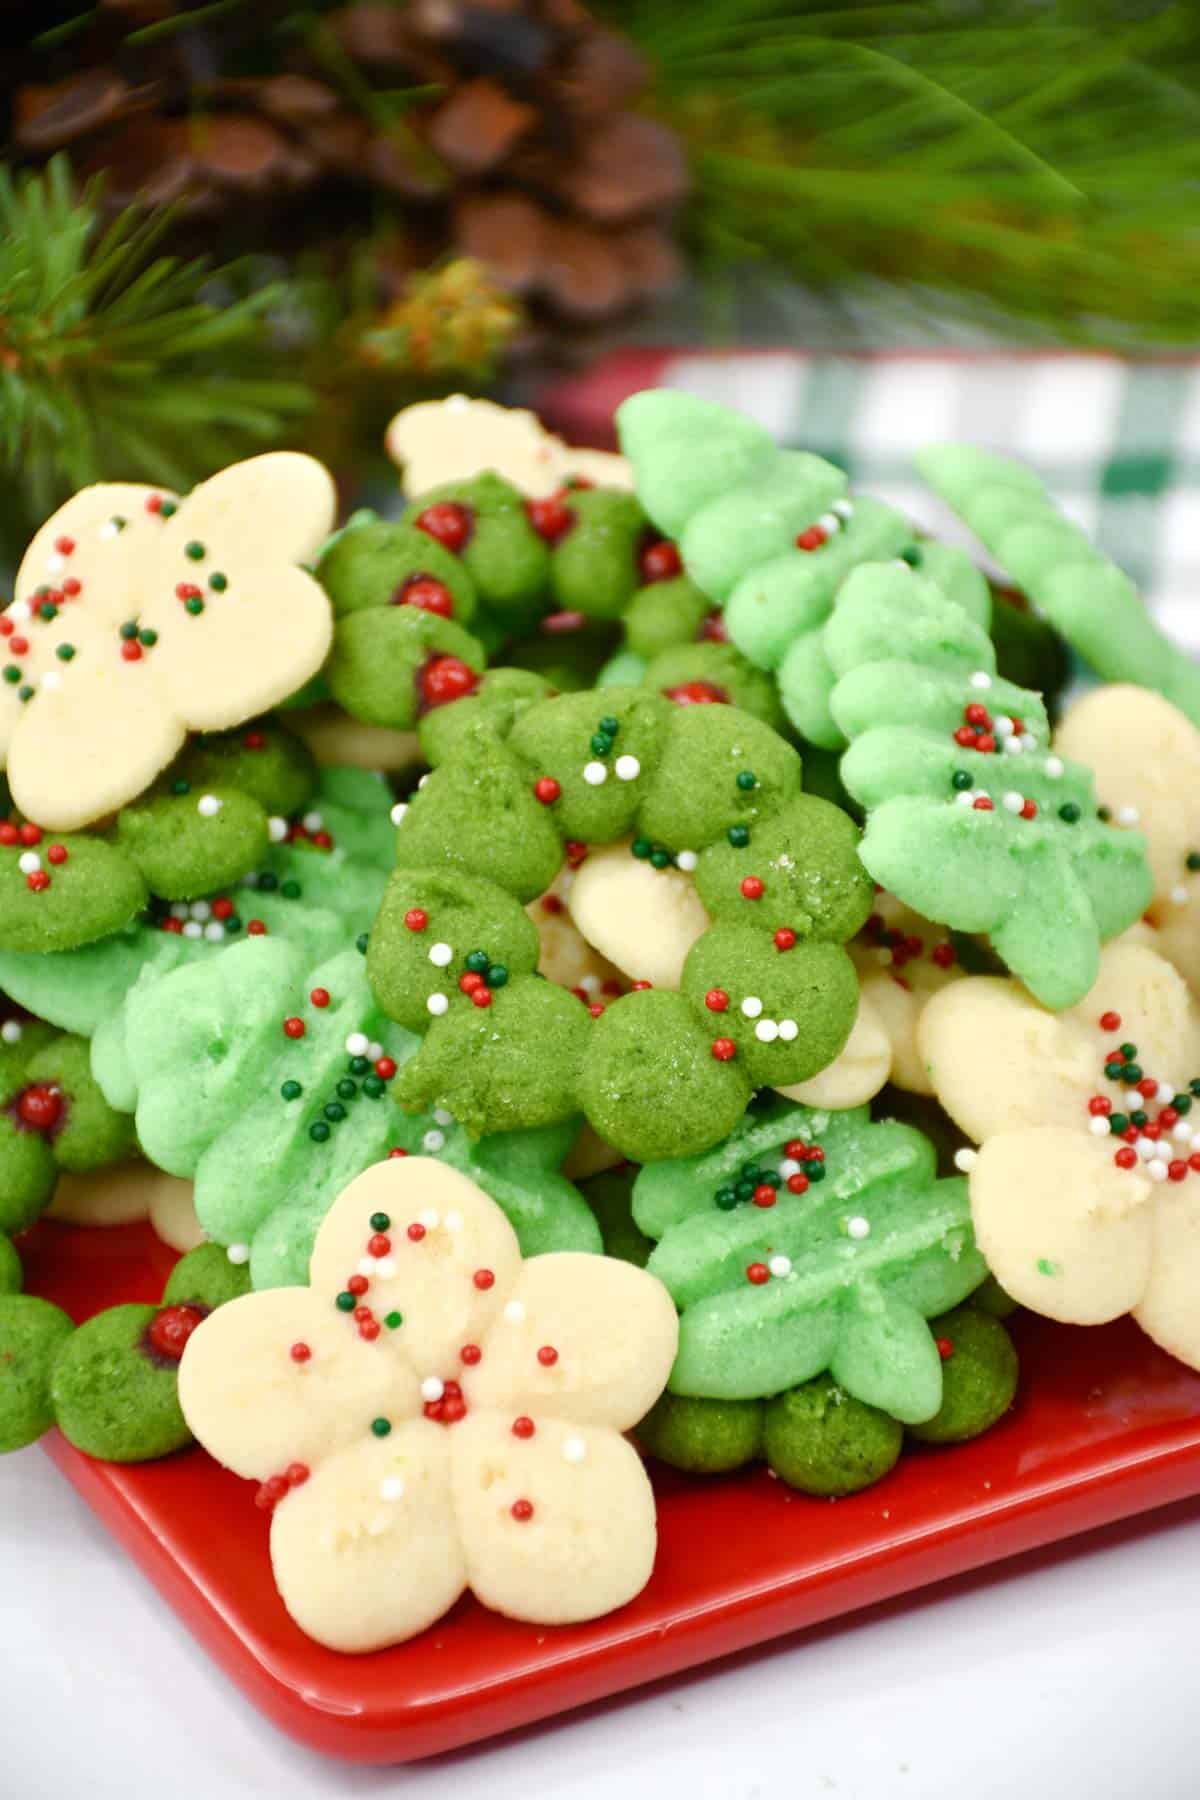 Christmas cookies on a red plate with green and white decorations.